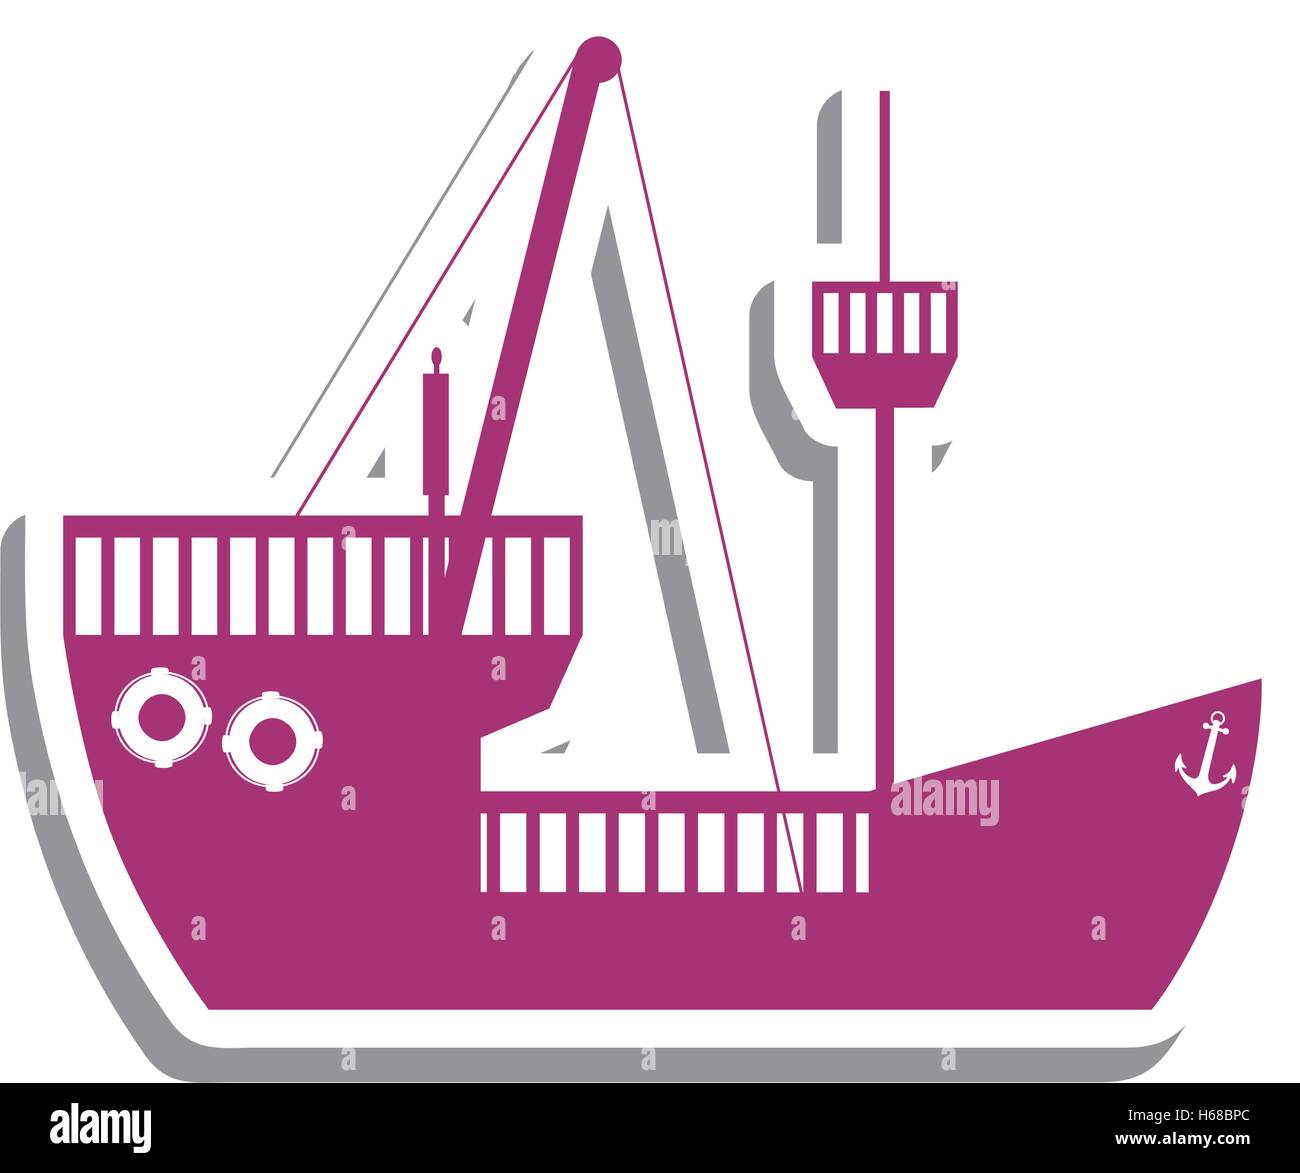 boat or ship pictogram icon image Stock Vector